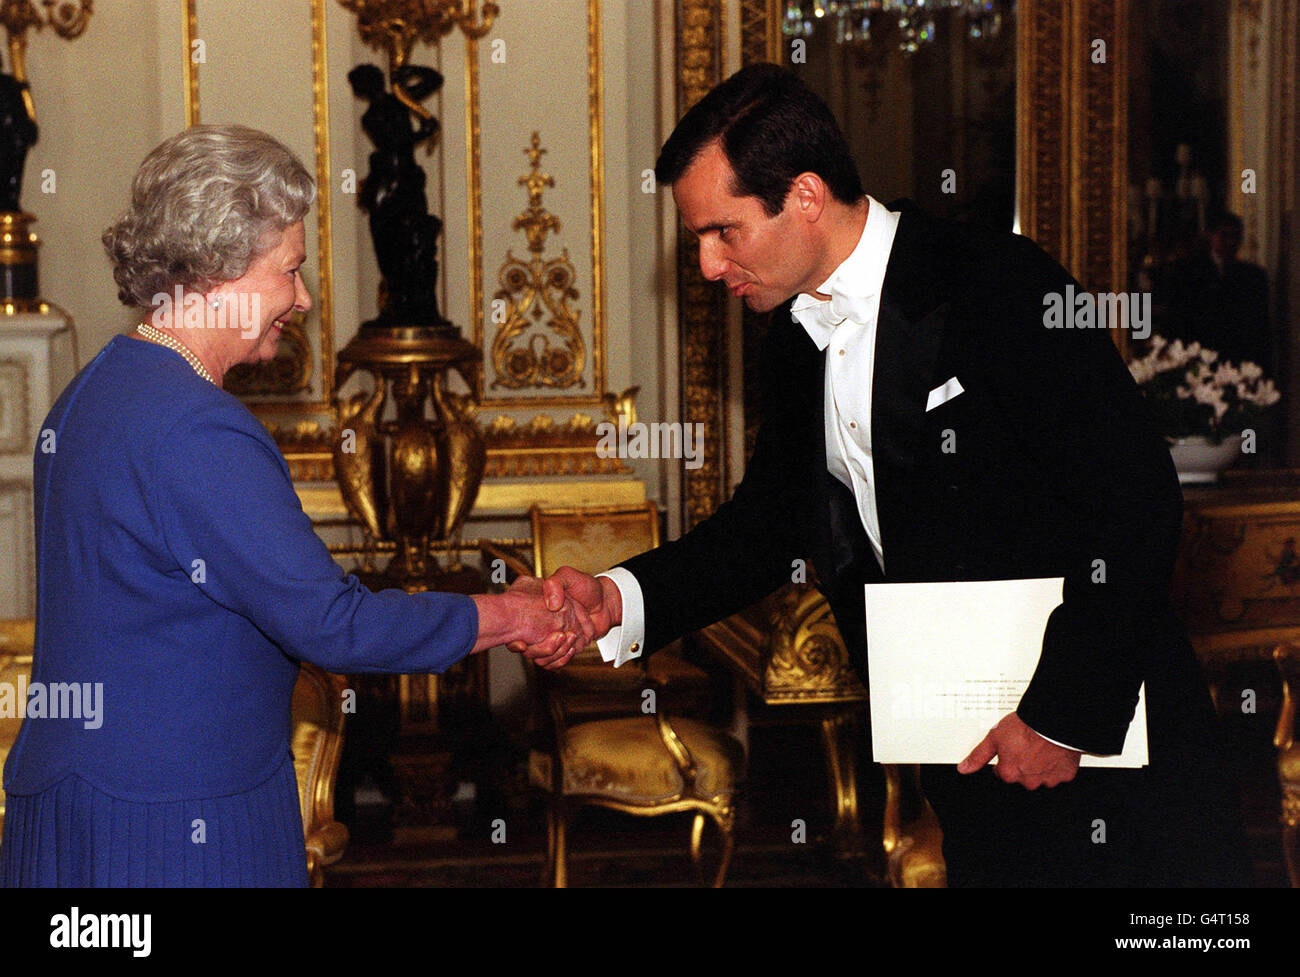 Queen Elizabeth II receiving His Excellency the Ambassador of Poland , Dr Stanislaw Komorowski, who presented his letter of Credence at Buckingham Palace, London. Stock Photo